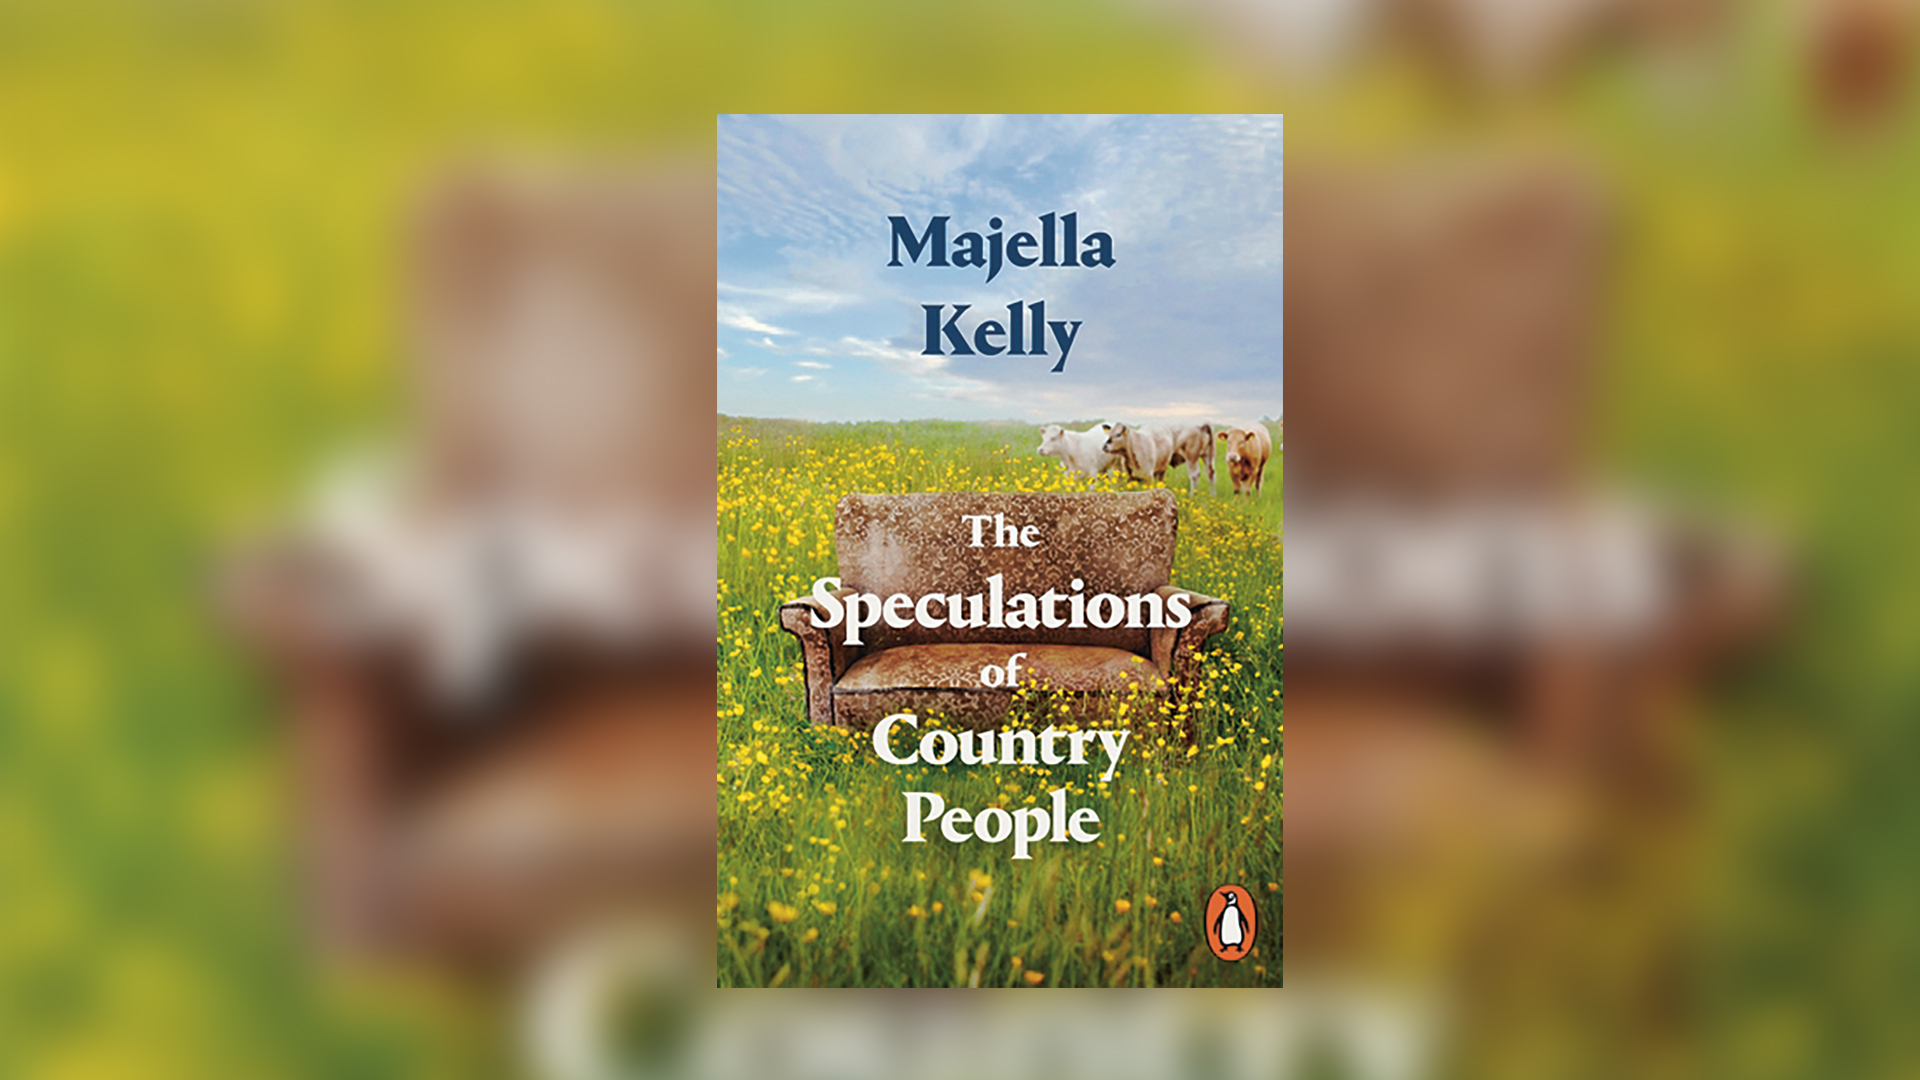 The Speculations of Country People by Majella Kelly